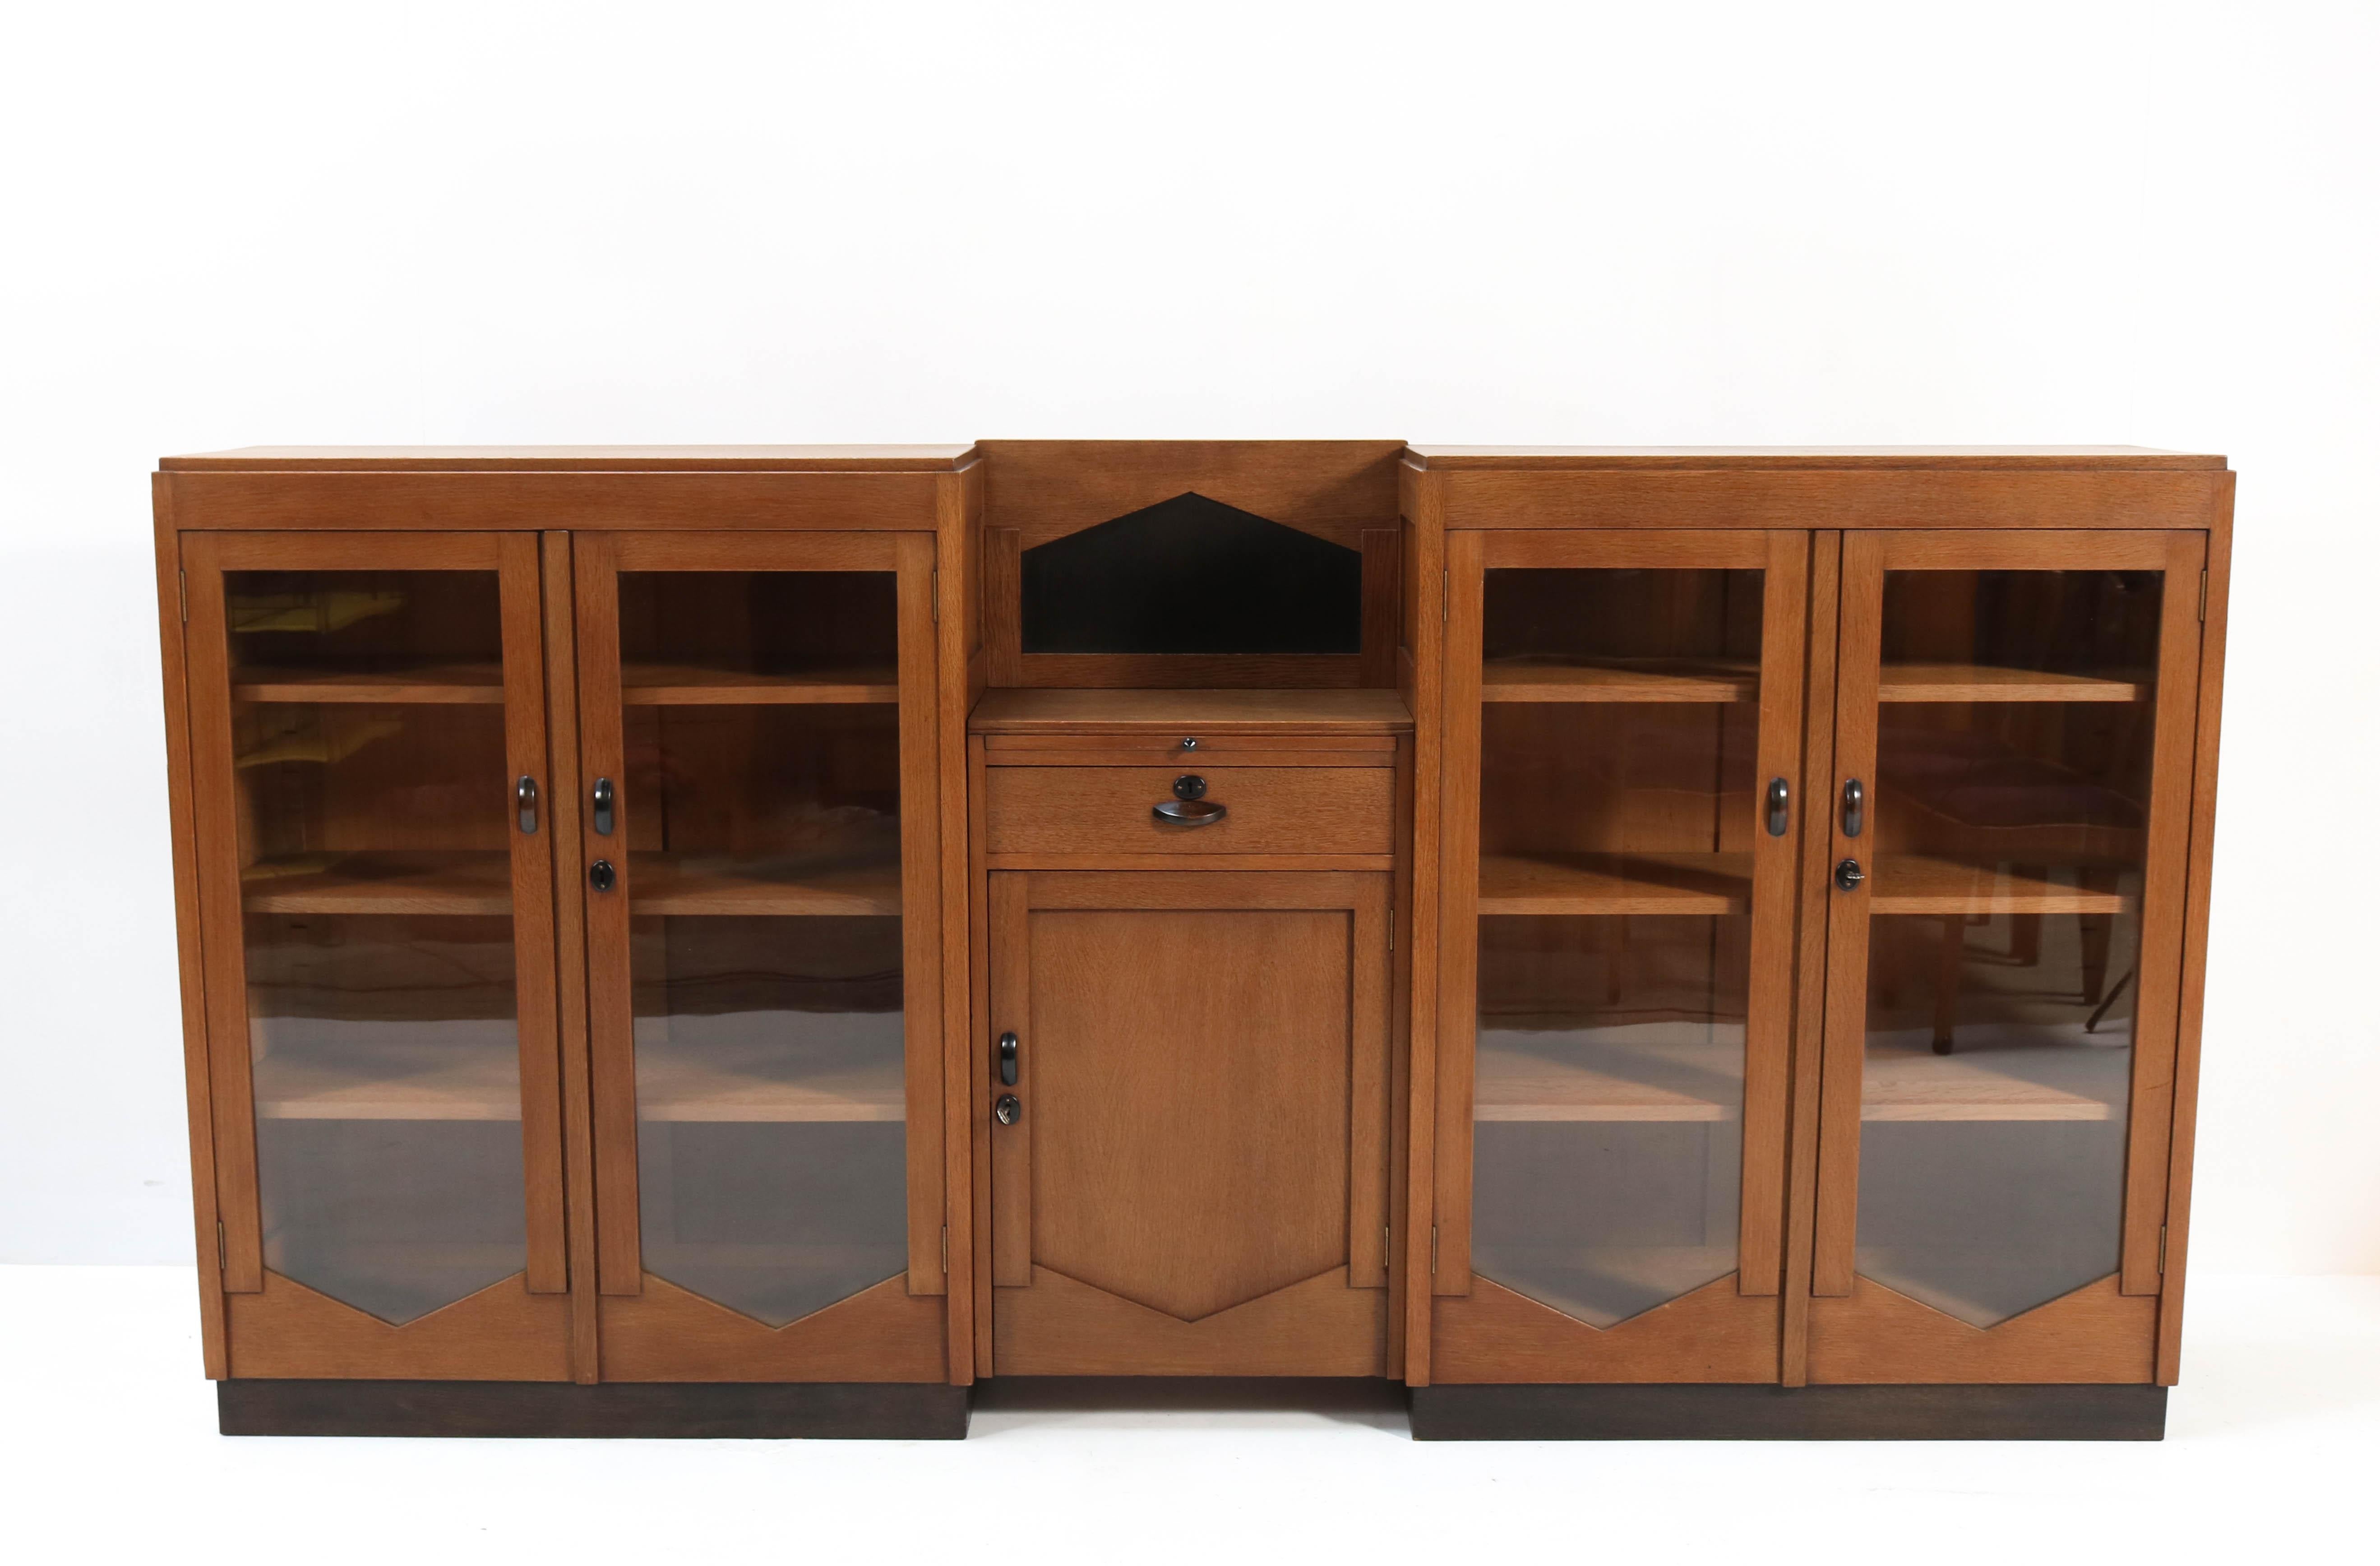 Magnificent and rare Art Deco Amsterdam School large bookcase.
Striking Dutch design from the 1920s.
Solid oak with original glass in the doors.
Original black lacquered handles.
Eight original solid oak shelves adjustable in height.
This